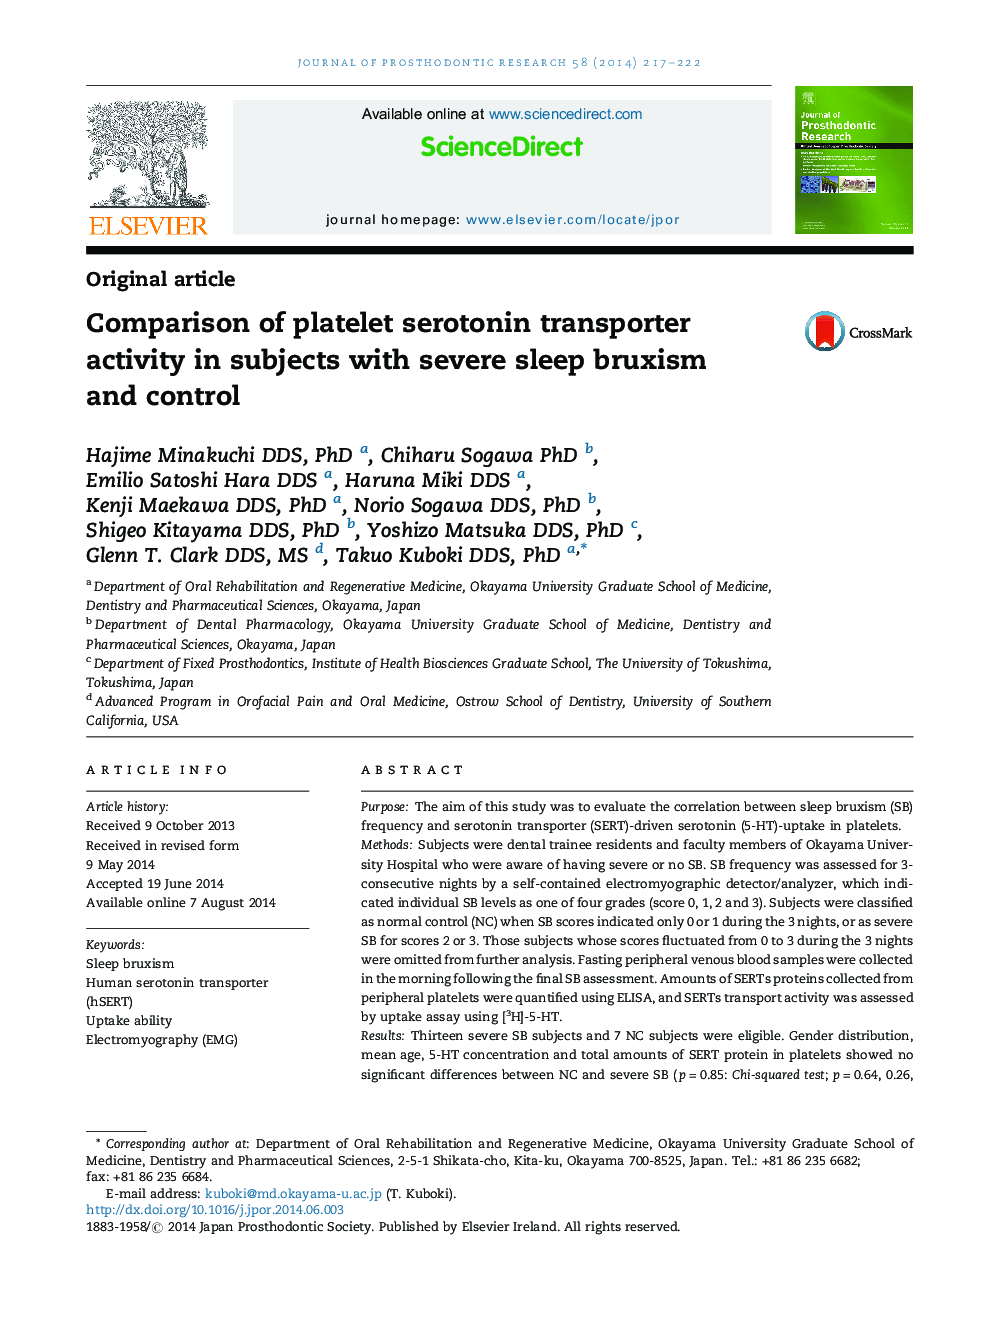 Comparison of platelet serotonin transporter activity in subjects with severe sleep bruxism and control